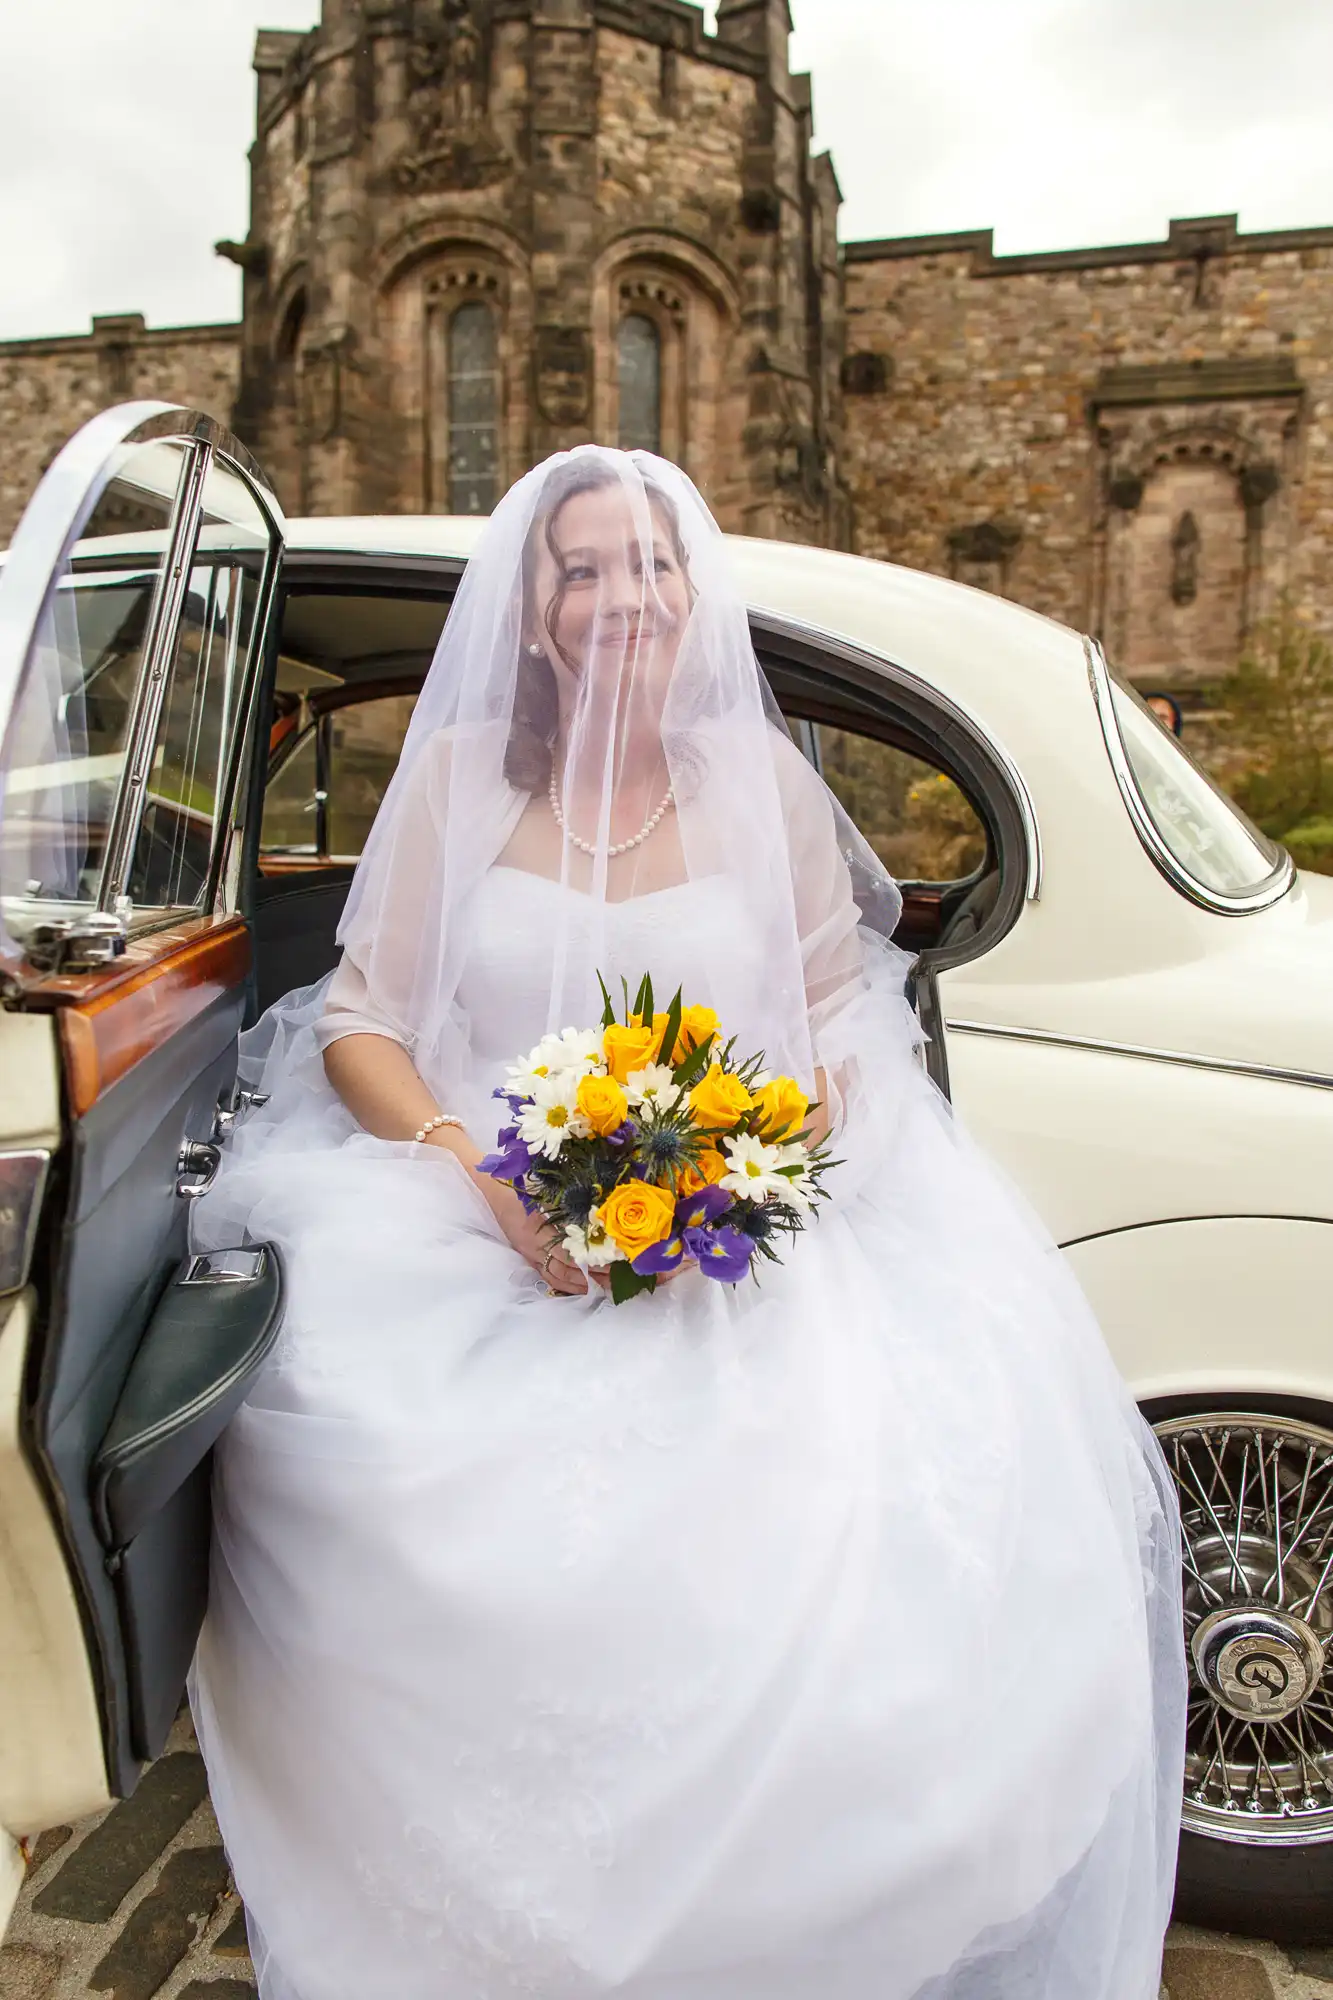 A bride in a white dress and veil sits in a classic car, holding a bouquet of yellow and purple flowers, with a historic castle in the background.